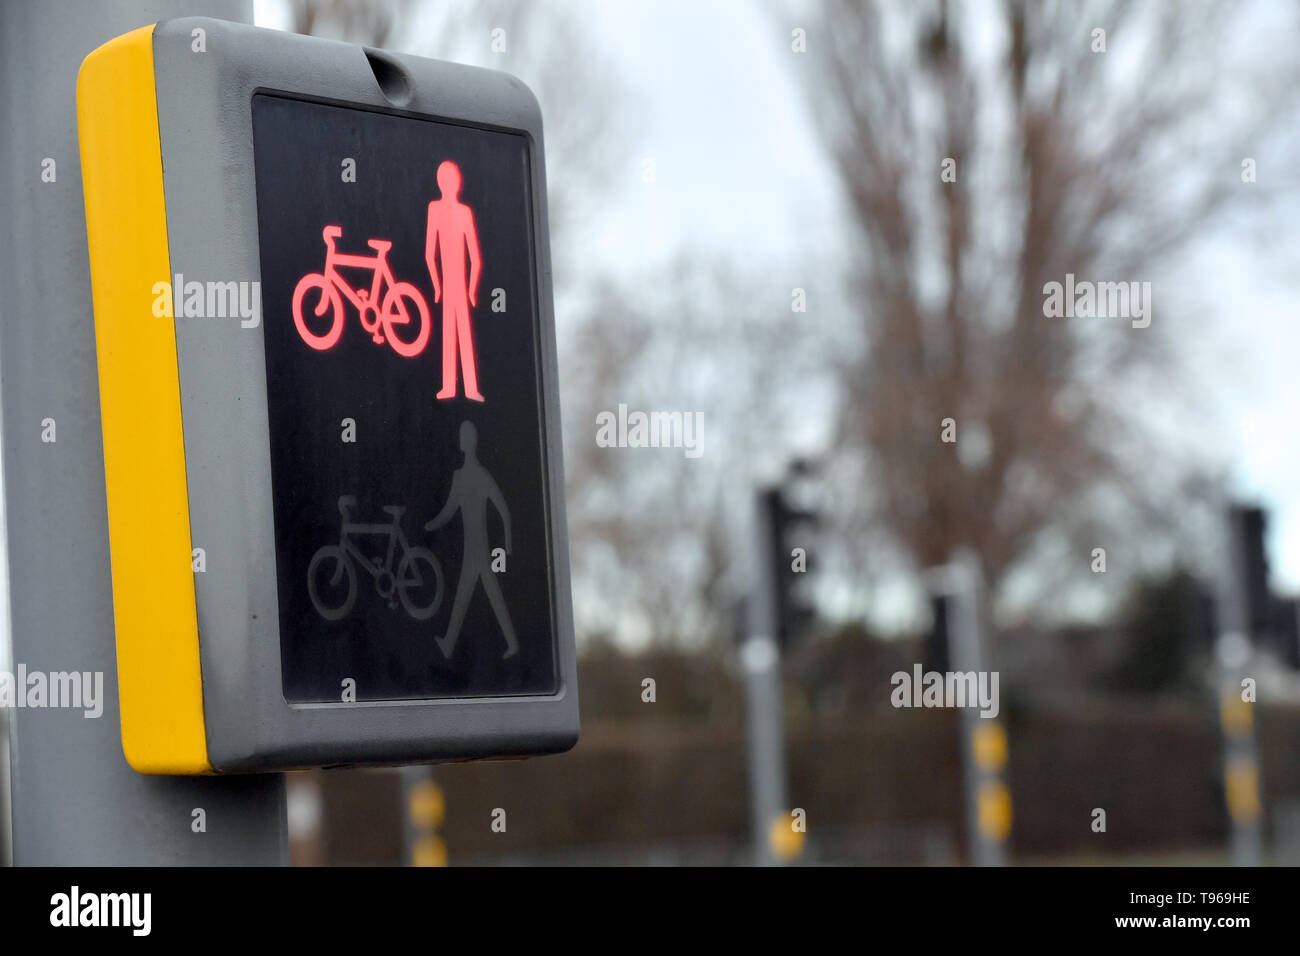 Pedestrian and cycle crossing lights Stock Photo